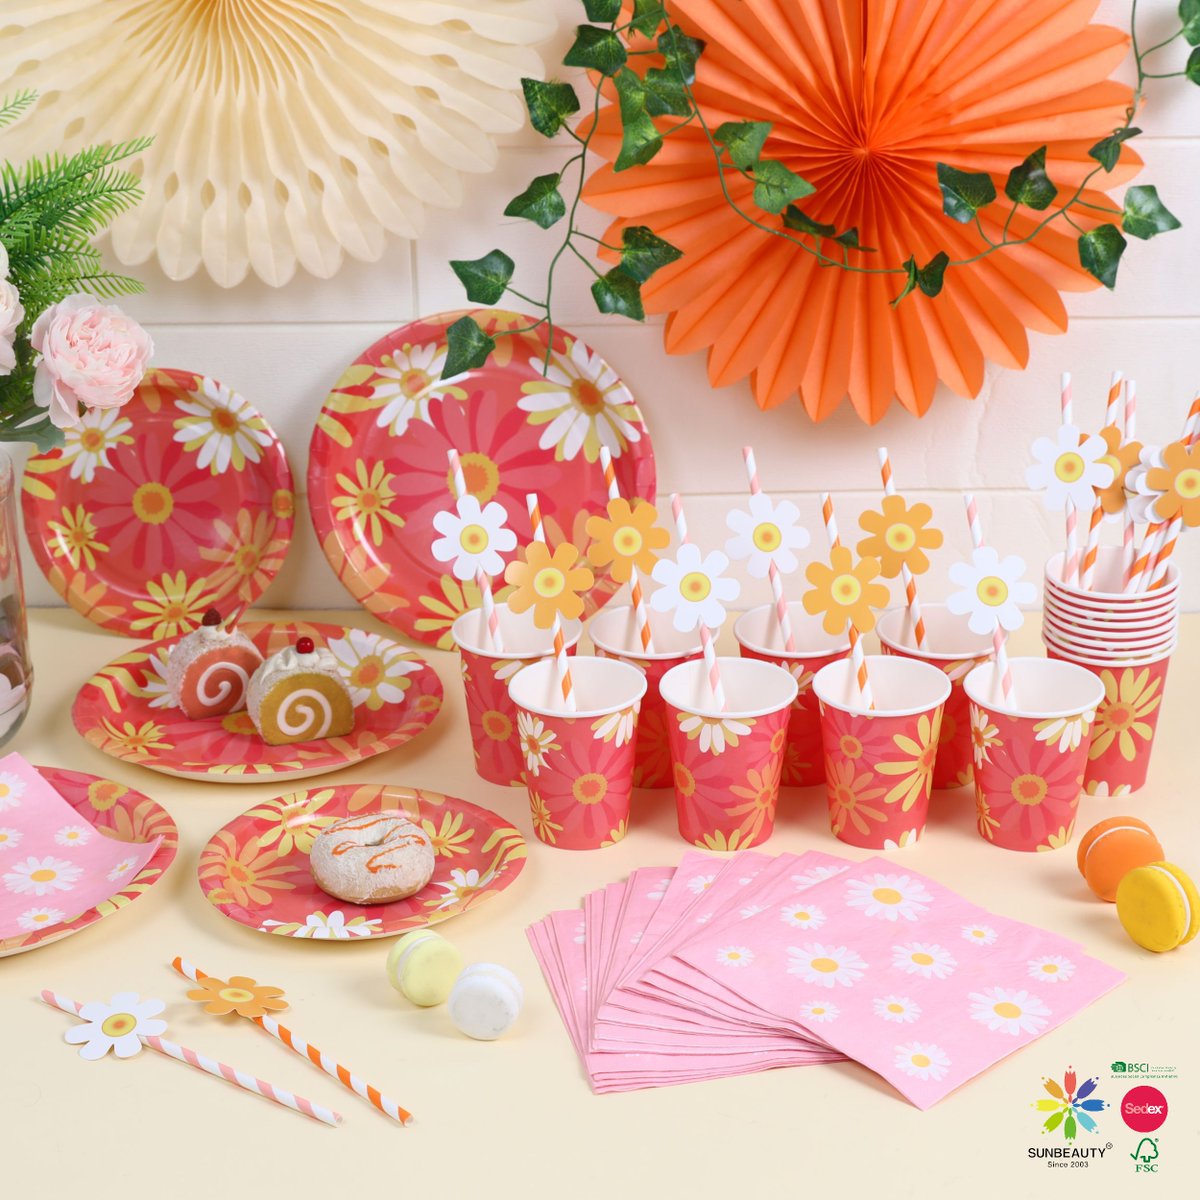 Our biodegradable daisy-themed paper tableware set not only adds flair to your table but also reduces your carbon footprint. Let's celebrate sustainably! 

sunbeauty.com/products/table…